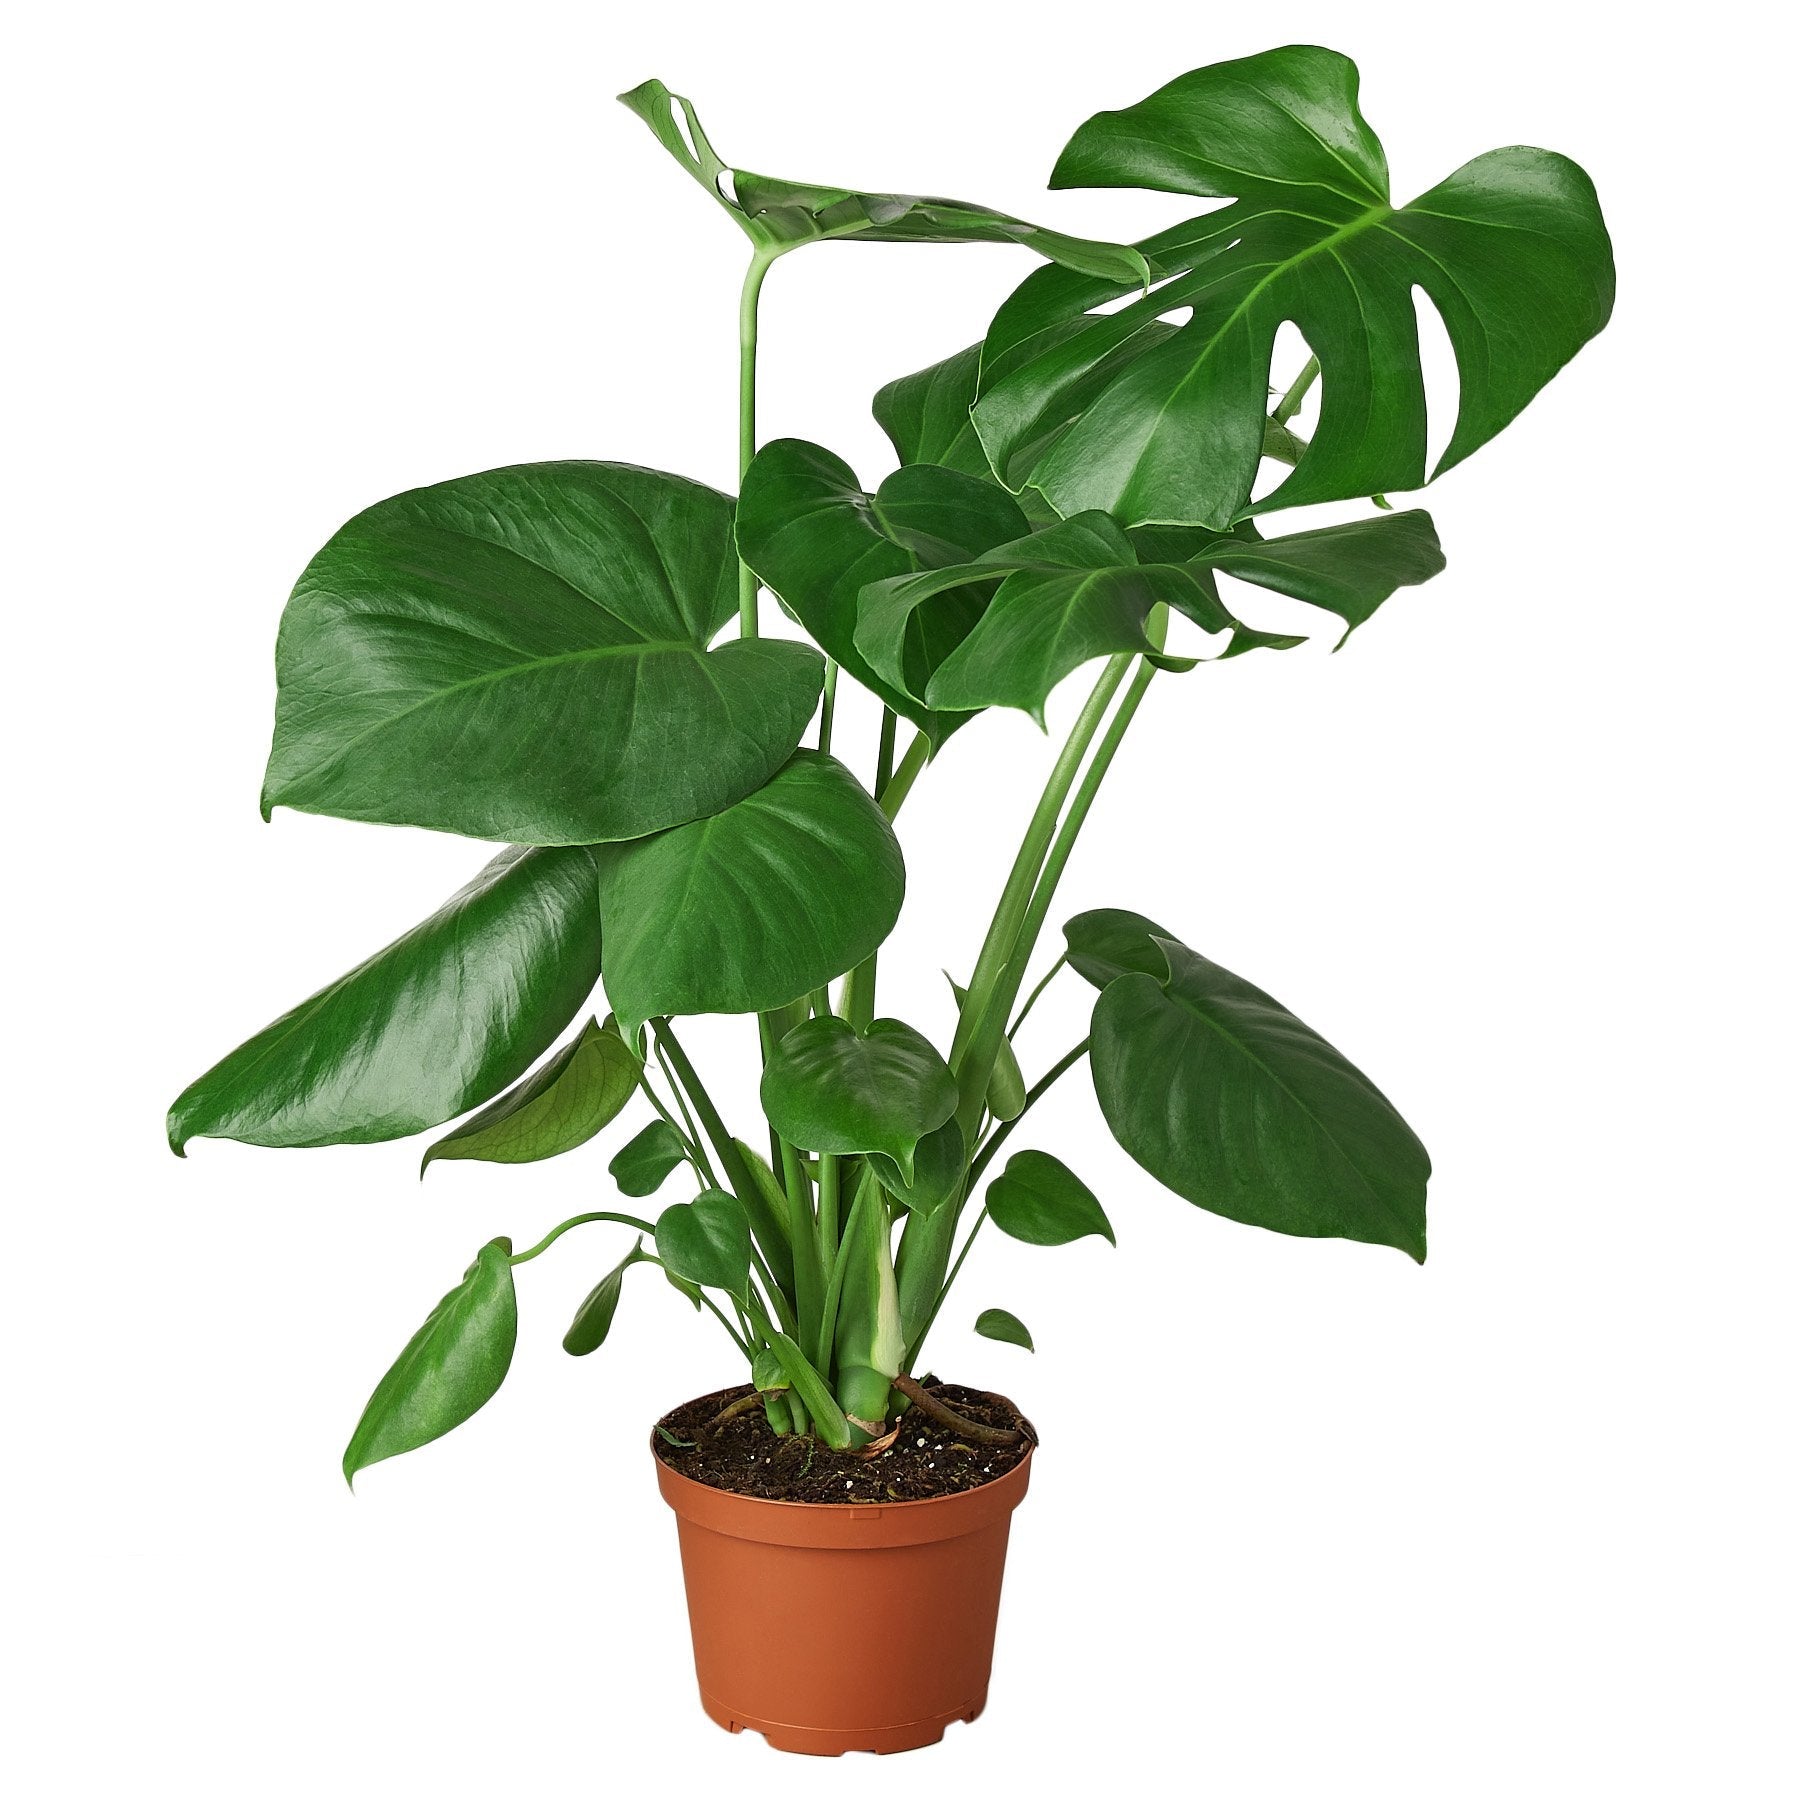 A large plant in a pot on a white background available at the best nursery near me.